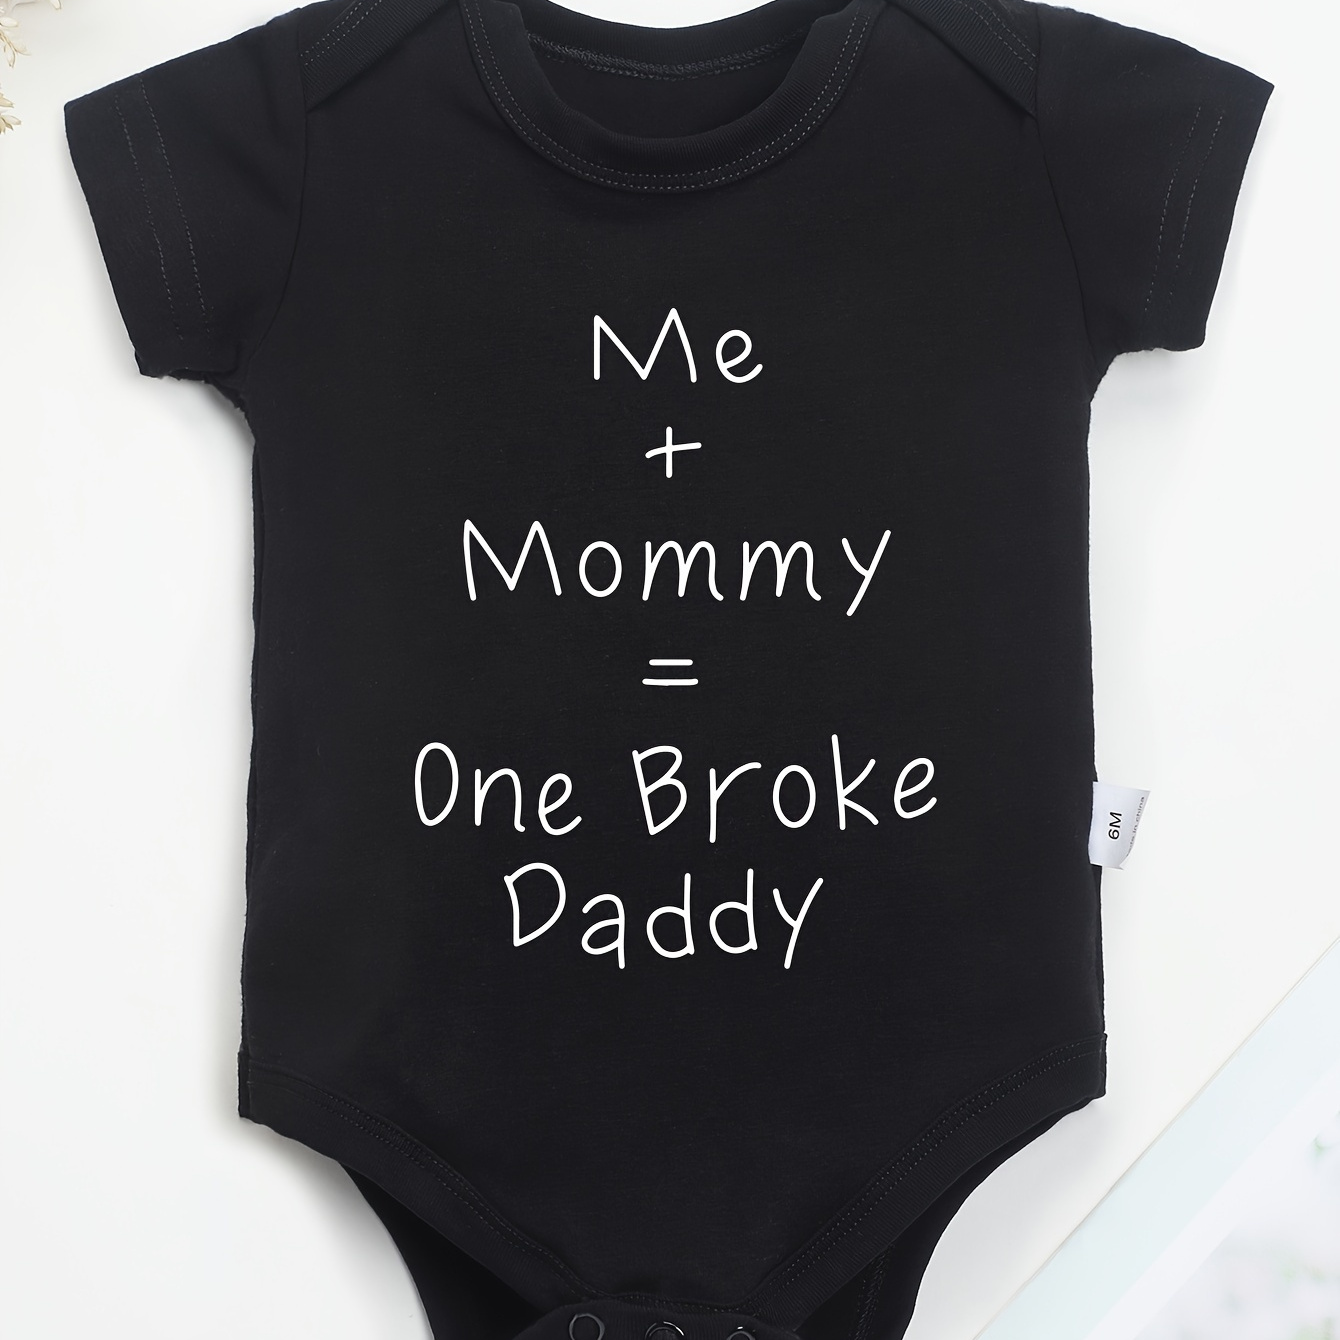 

100% Pure Cotton Baby Onesies "me+mommy=one Broke Daddy" Letter Printed Soft Casual Round Neck Baby Onesies